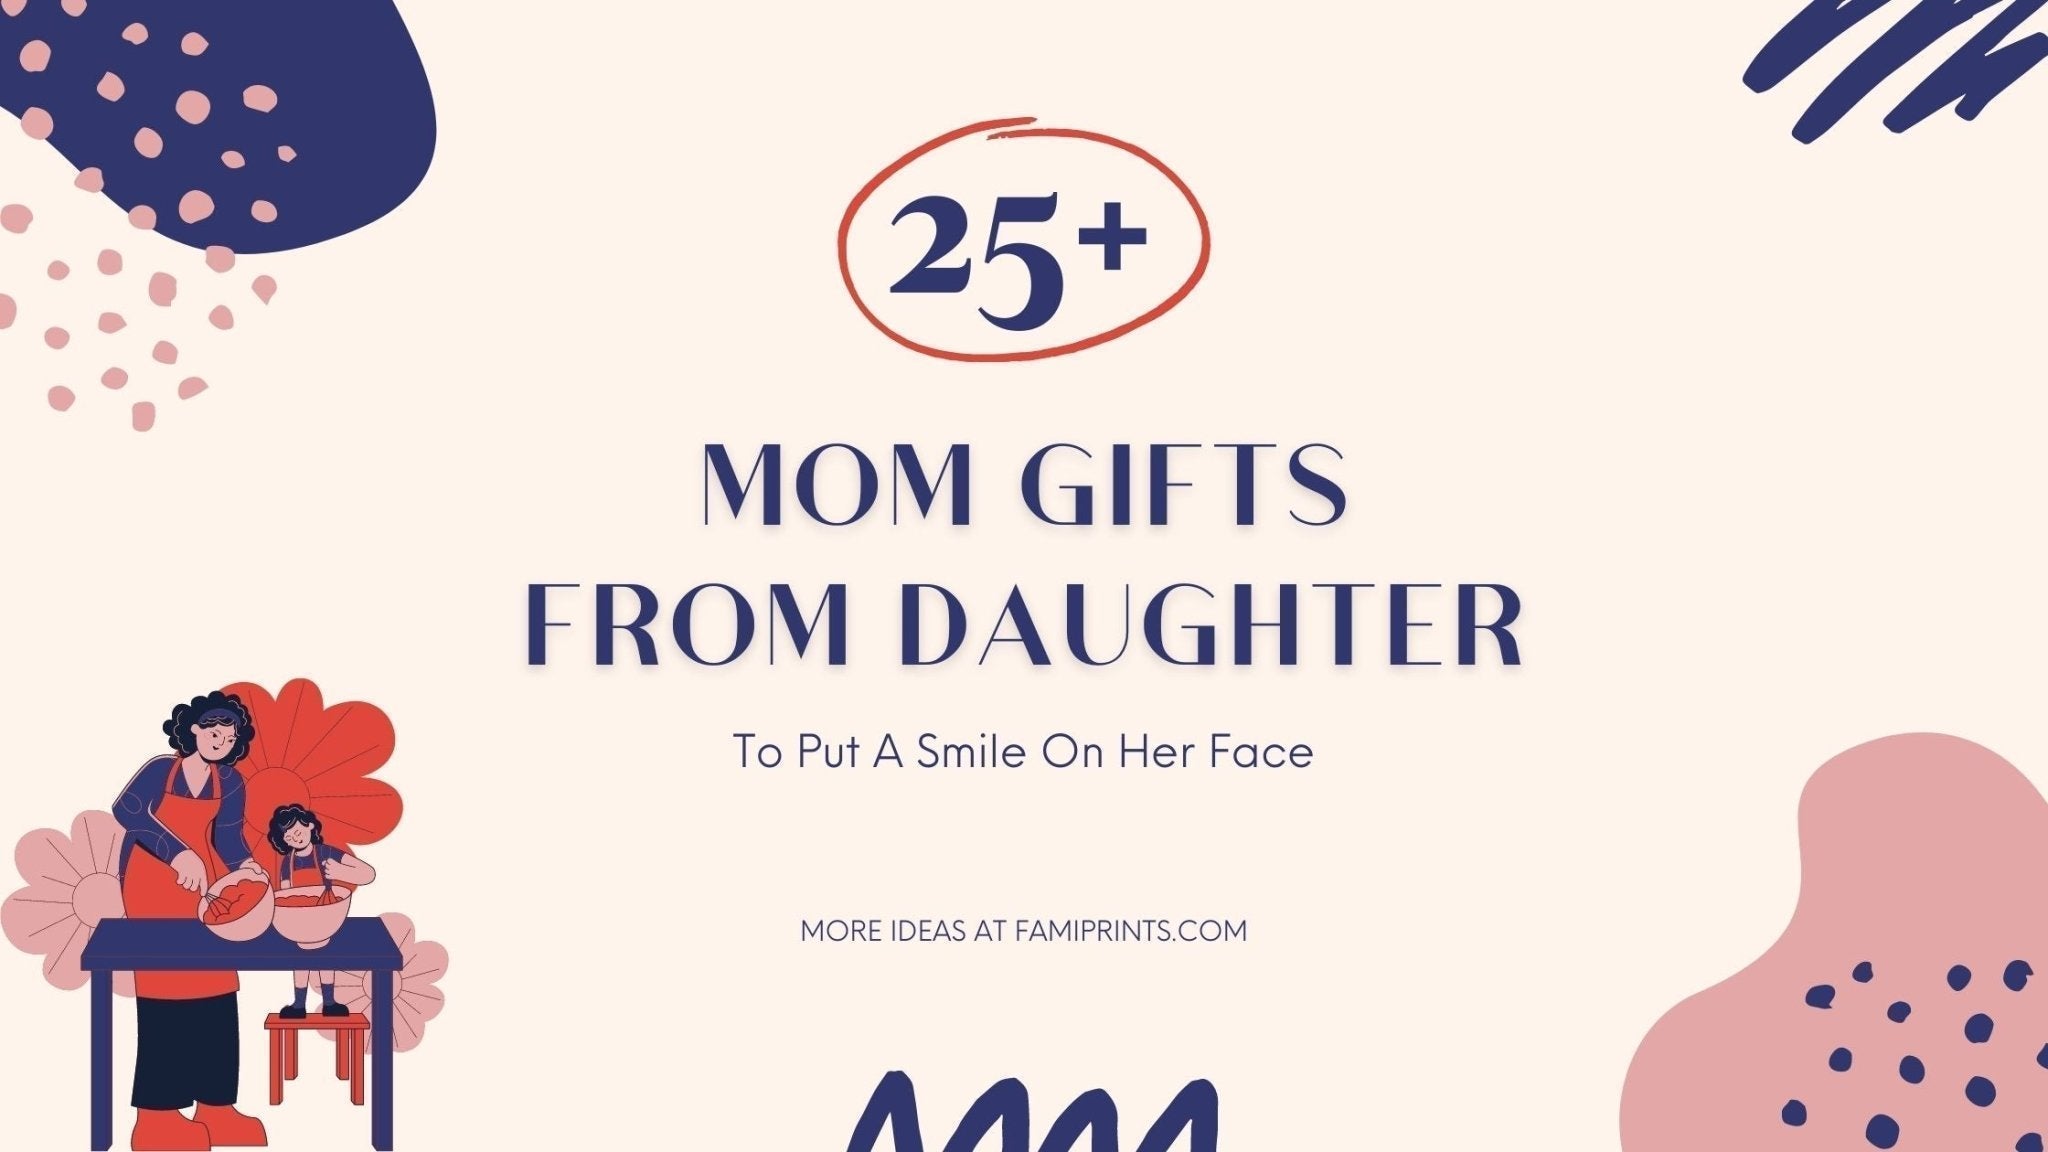 25+ Awesome Mom Gifts From Daughter To Put A Smile On Her Face